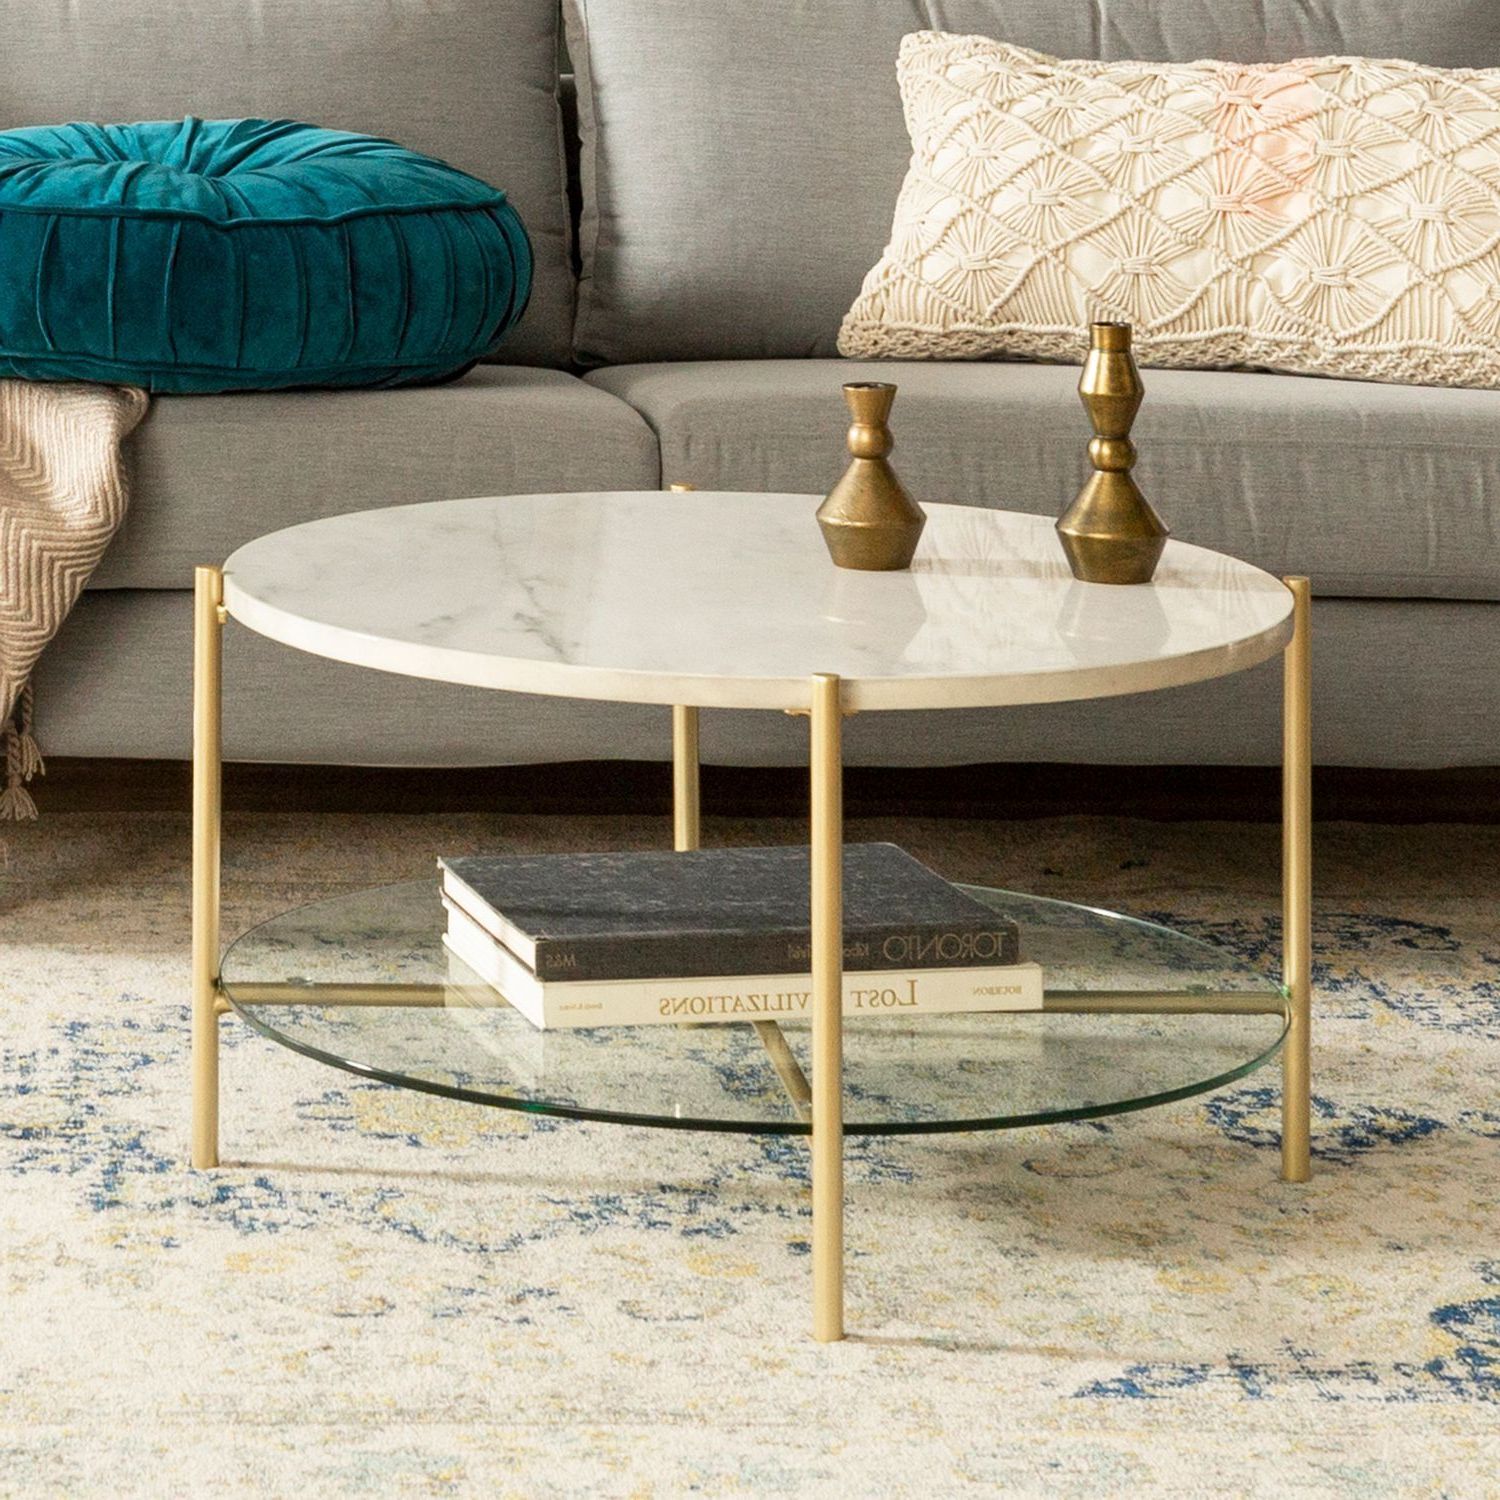 Round White Faux Marble & Gold Coffee Table With Glass Shelf (View 5 of 15)